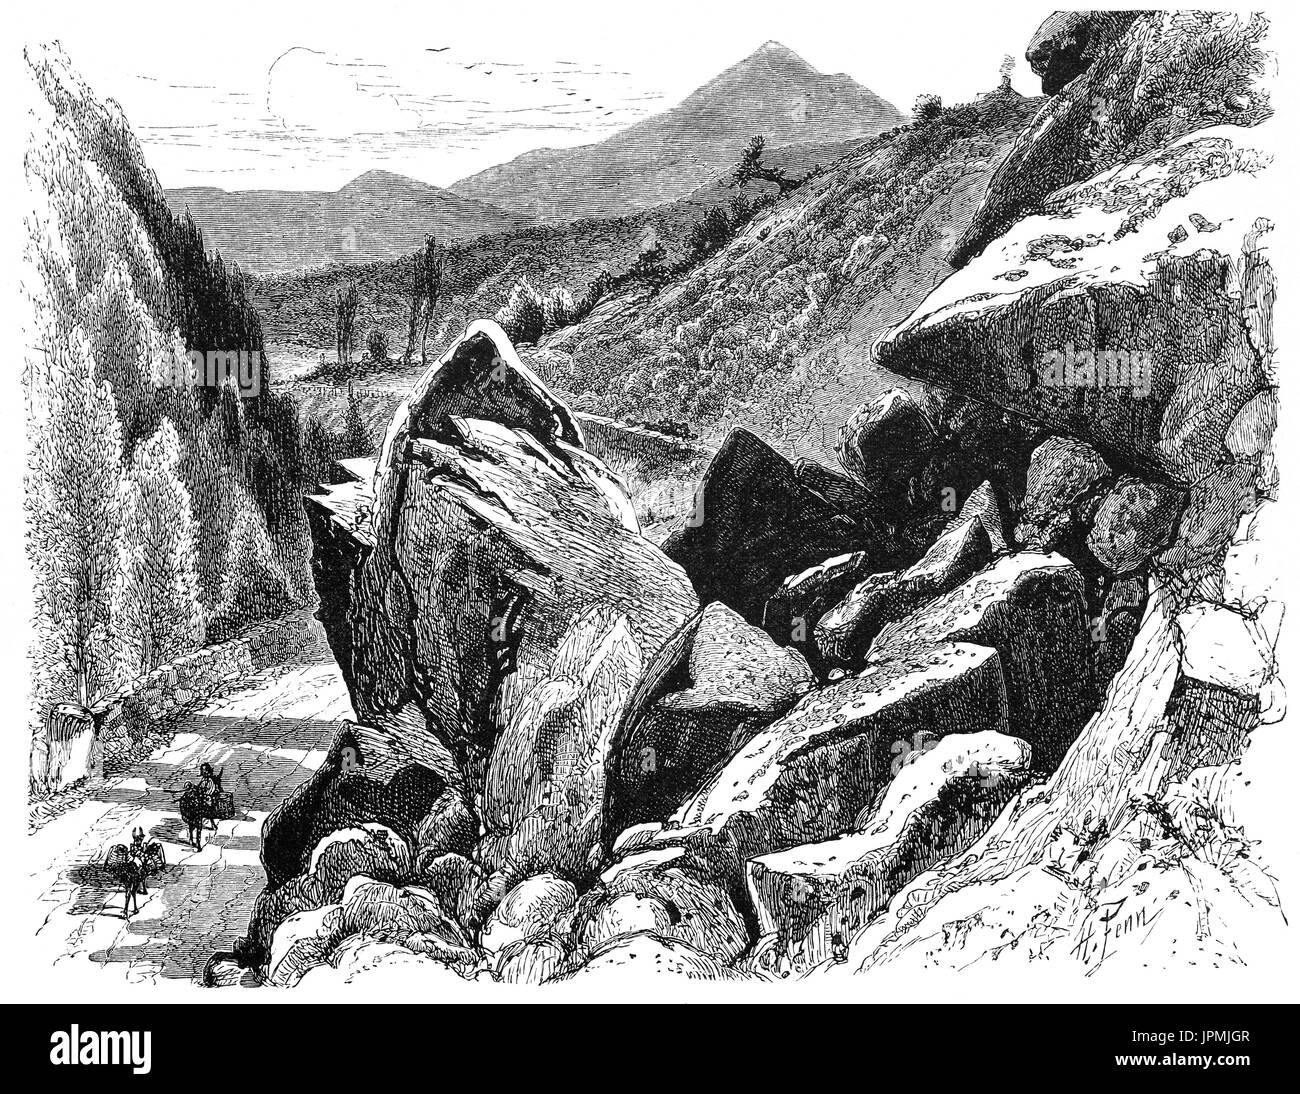 1870: Early travellers on the Scalp. The pass runs over a shoulder of Shankhill Mountain and through a ravine. From the south entrance a very fine view is obtained, having in the foreground the Greater and the Lesser Sugar Loaf Mountains, County Wicklow, Ireland Stock Photo